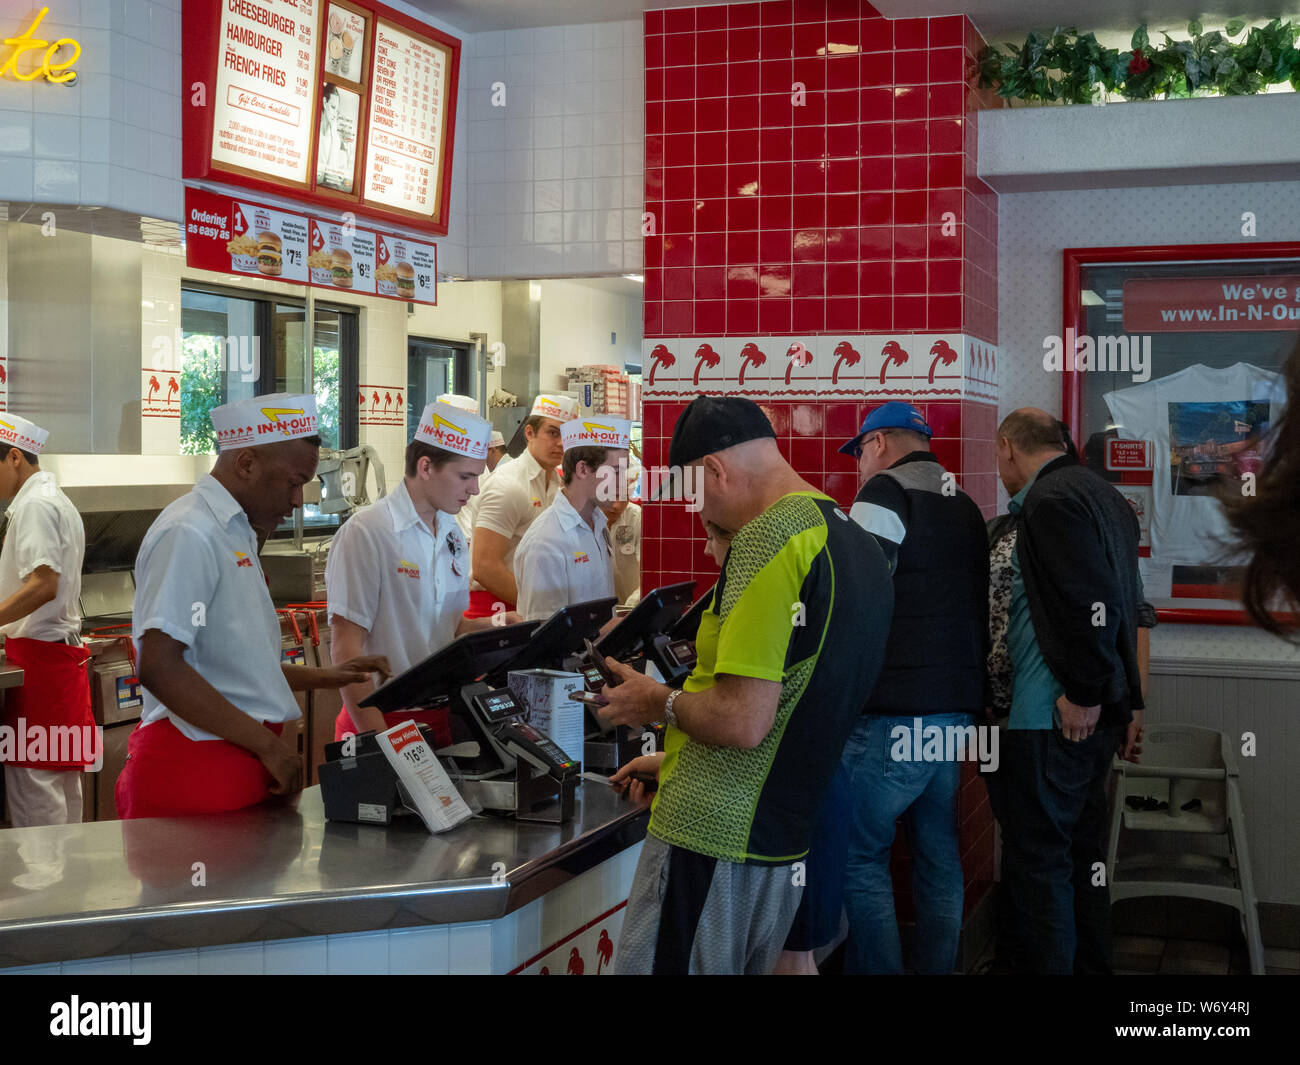 Diners lined up behind cashier and checkout counter at In-N-Out Stock Photo